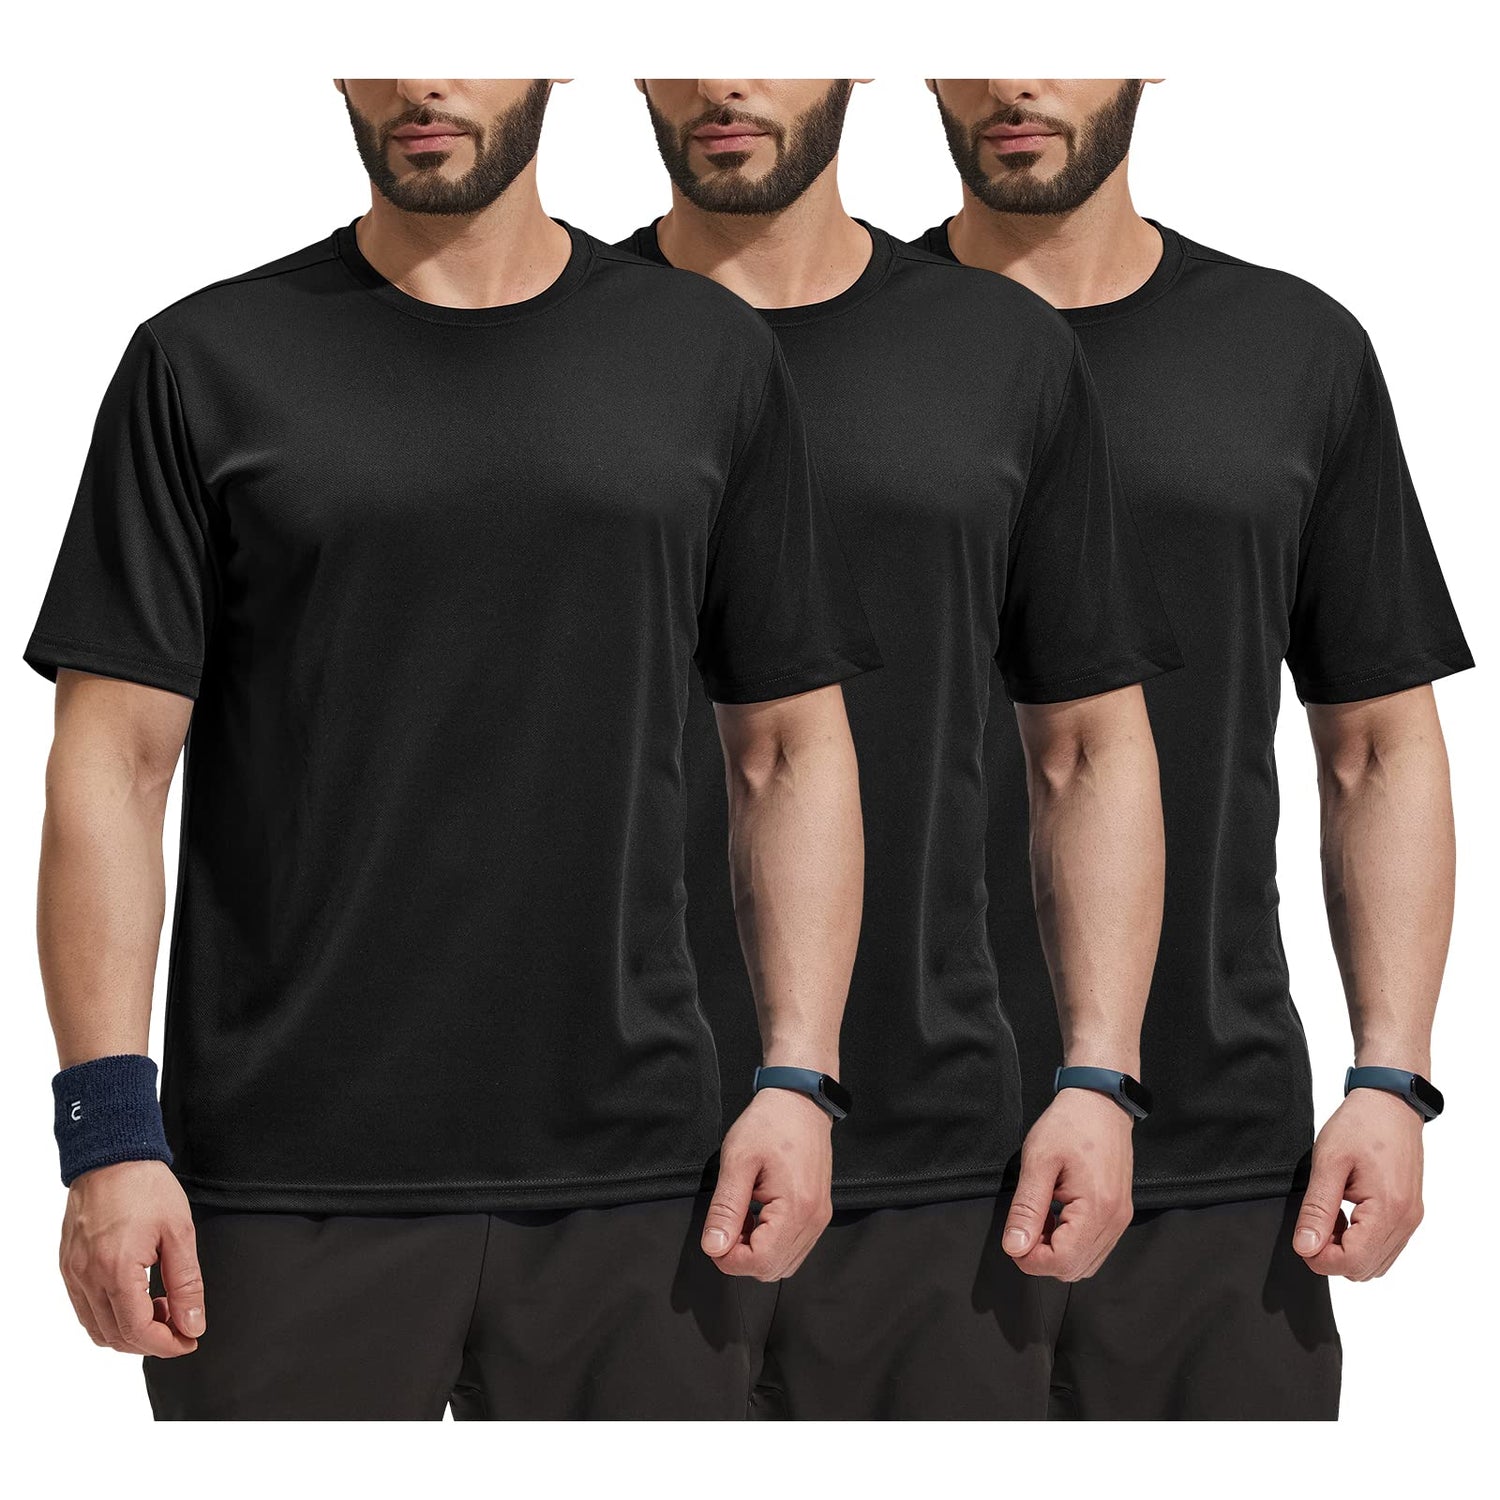 Men Dry Fit Workout T-shirts for Gym Athletic Running, 3 Pack Men Shirts Black / S MIER